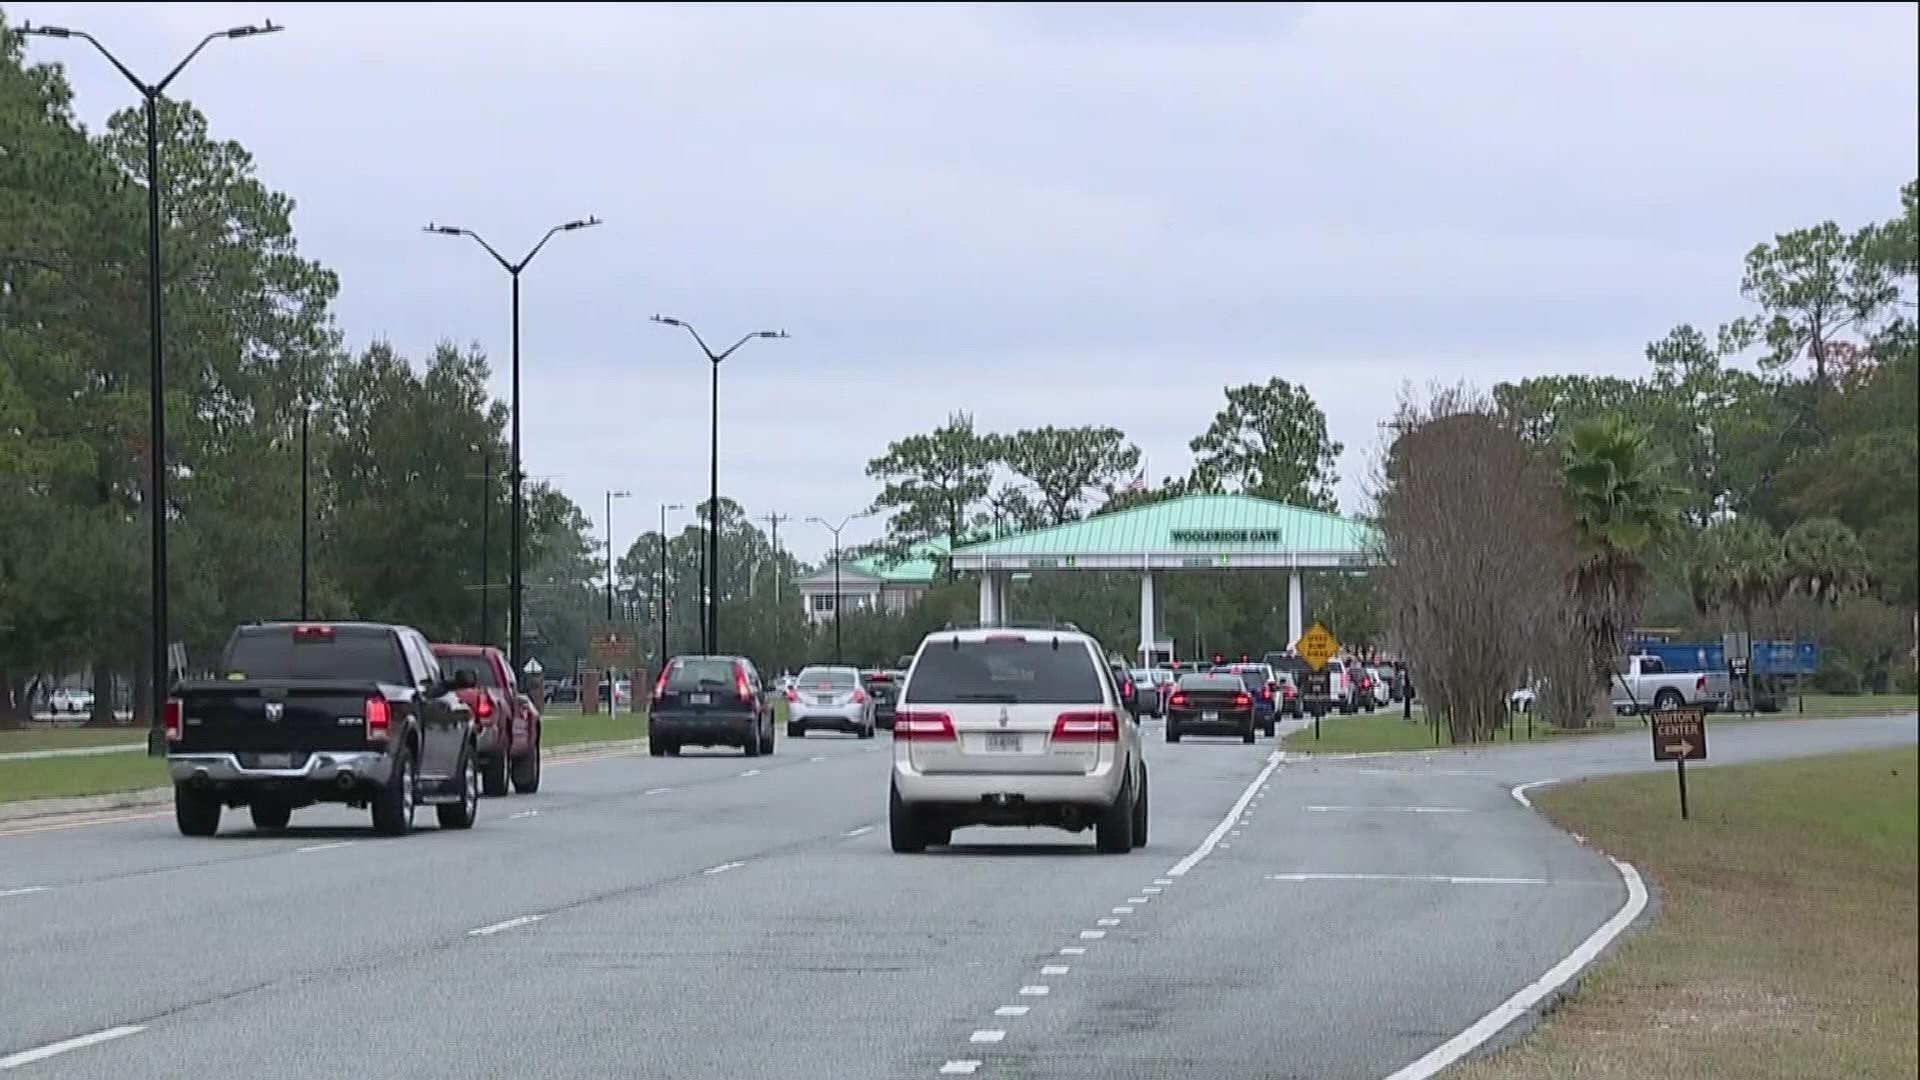 The incident happened early Monday at Fort Stewart.